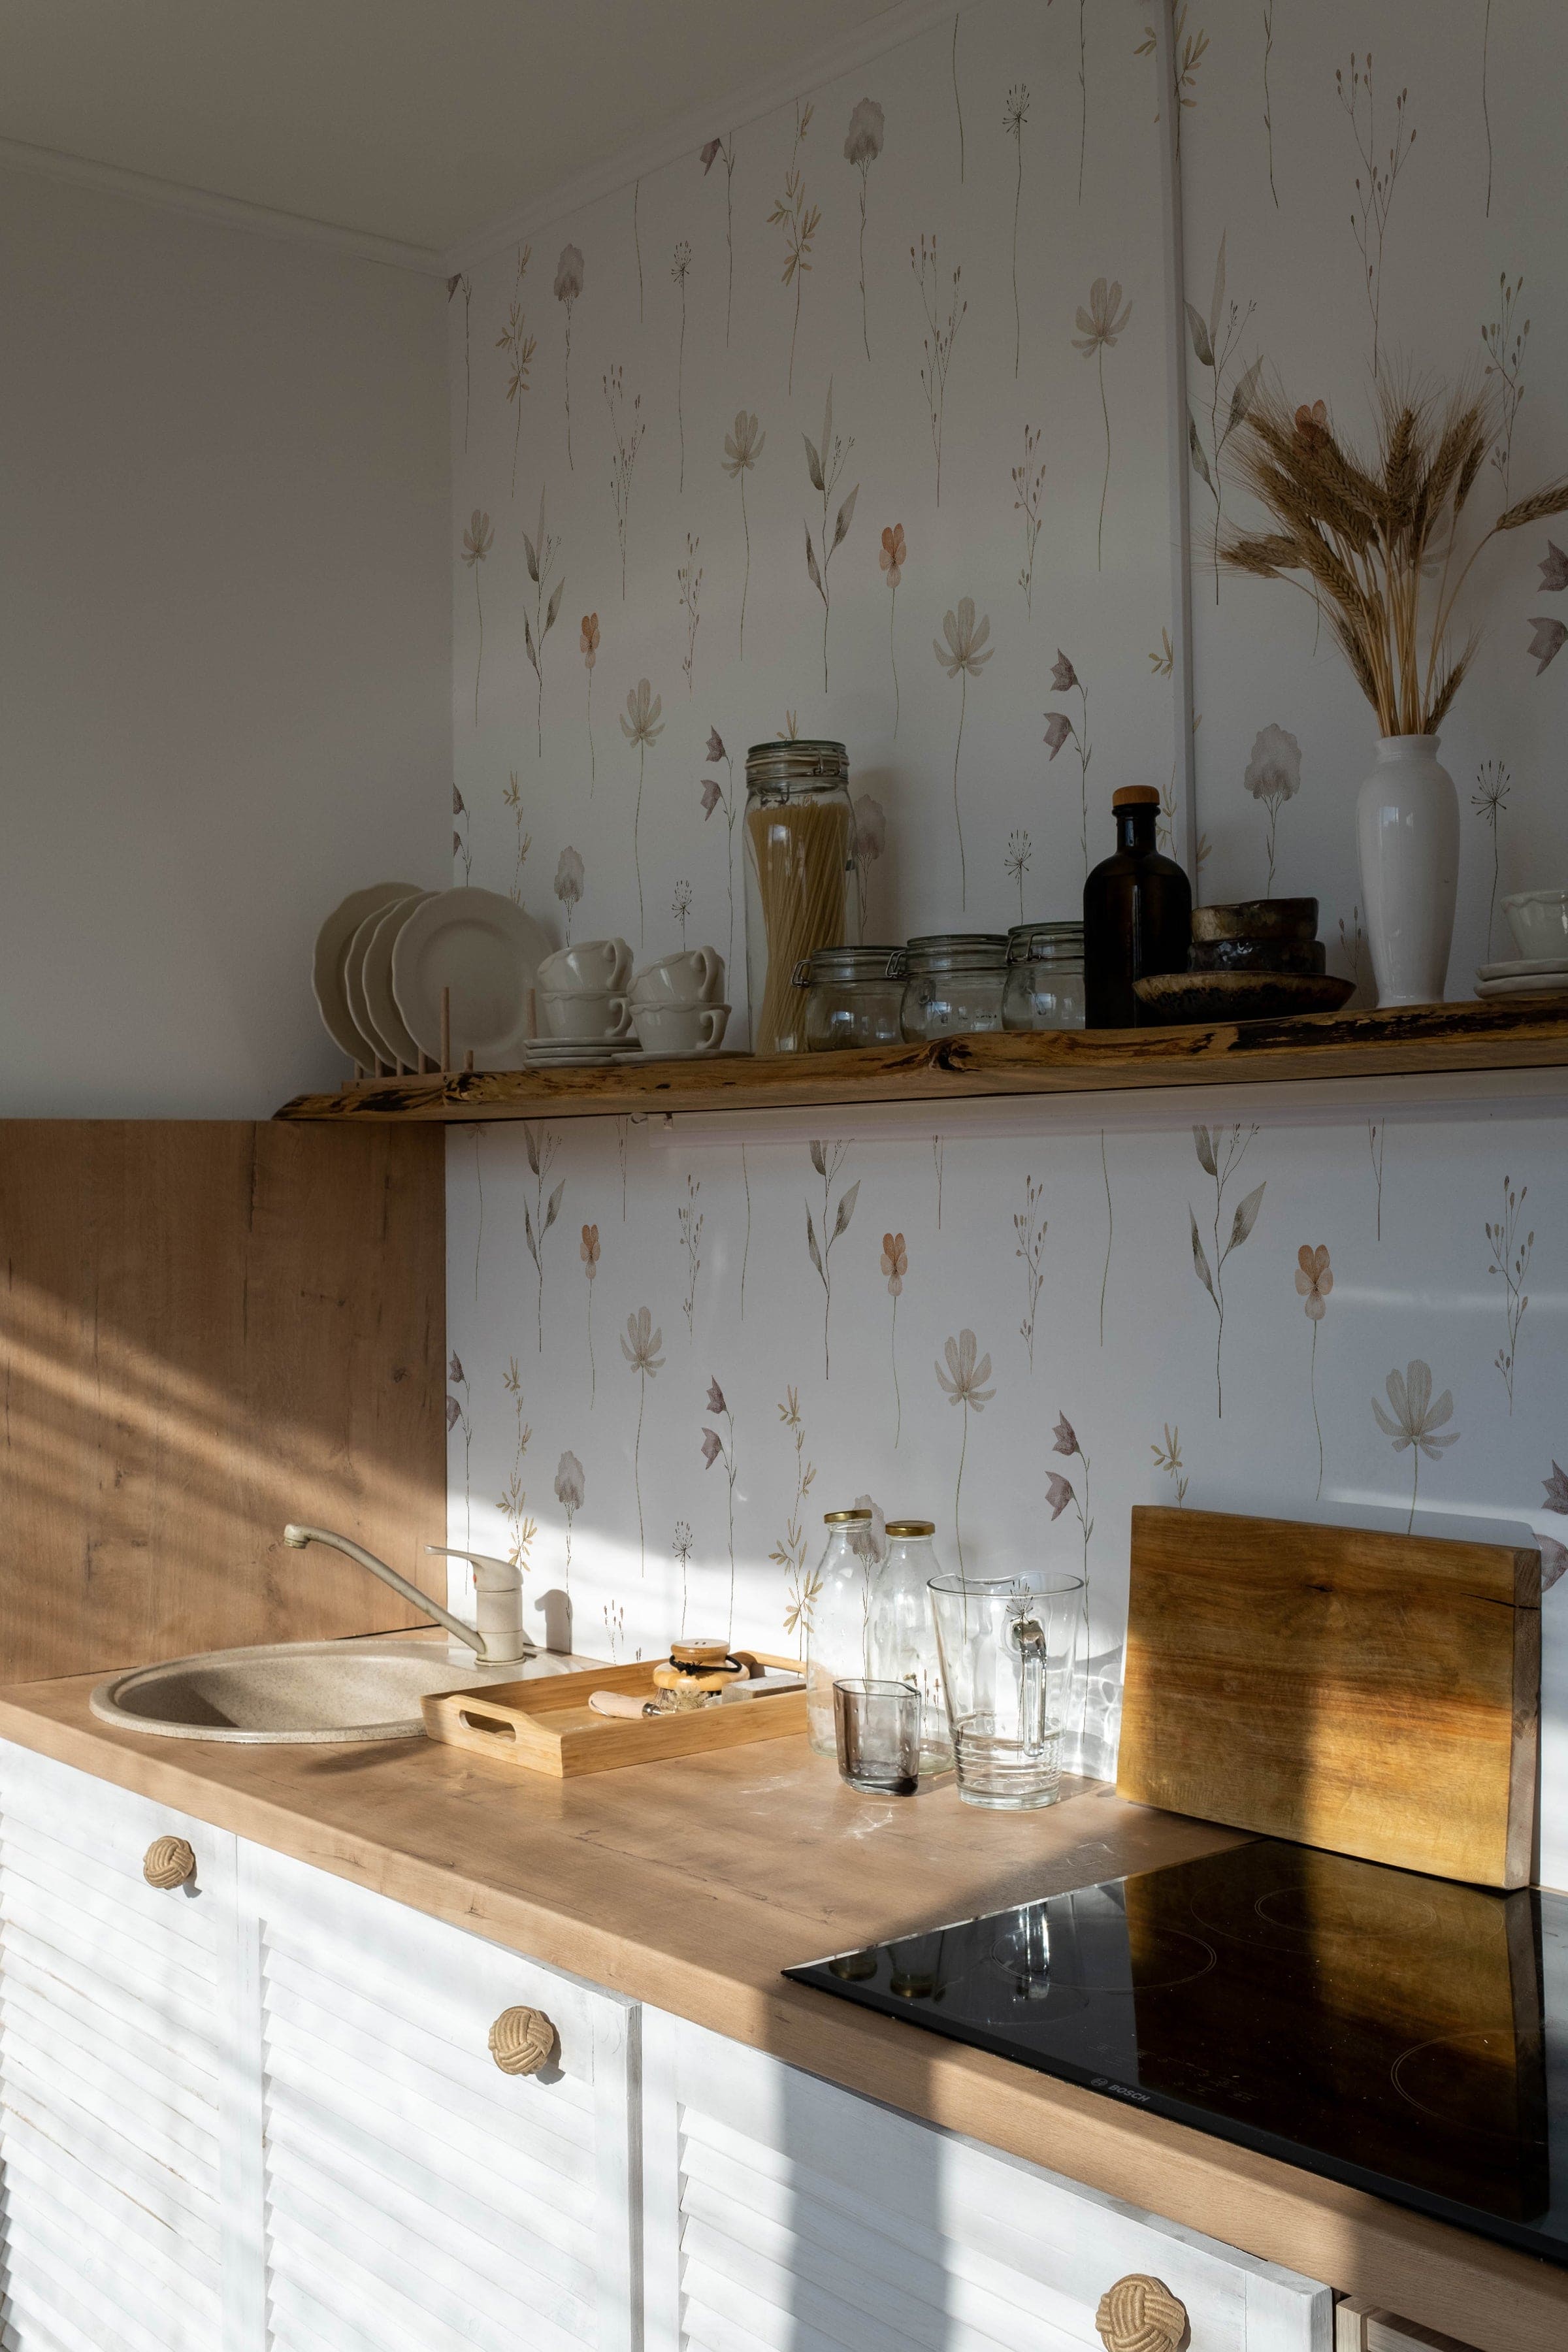 A kitchen corner showcasing the 'Muted Floral Wallpaper' as a delicate backdrop behind open wooden shelves, where the simplicity of the floral designs complements the rustic charm of the kitchenware and natural wood textures